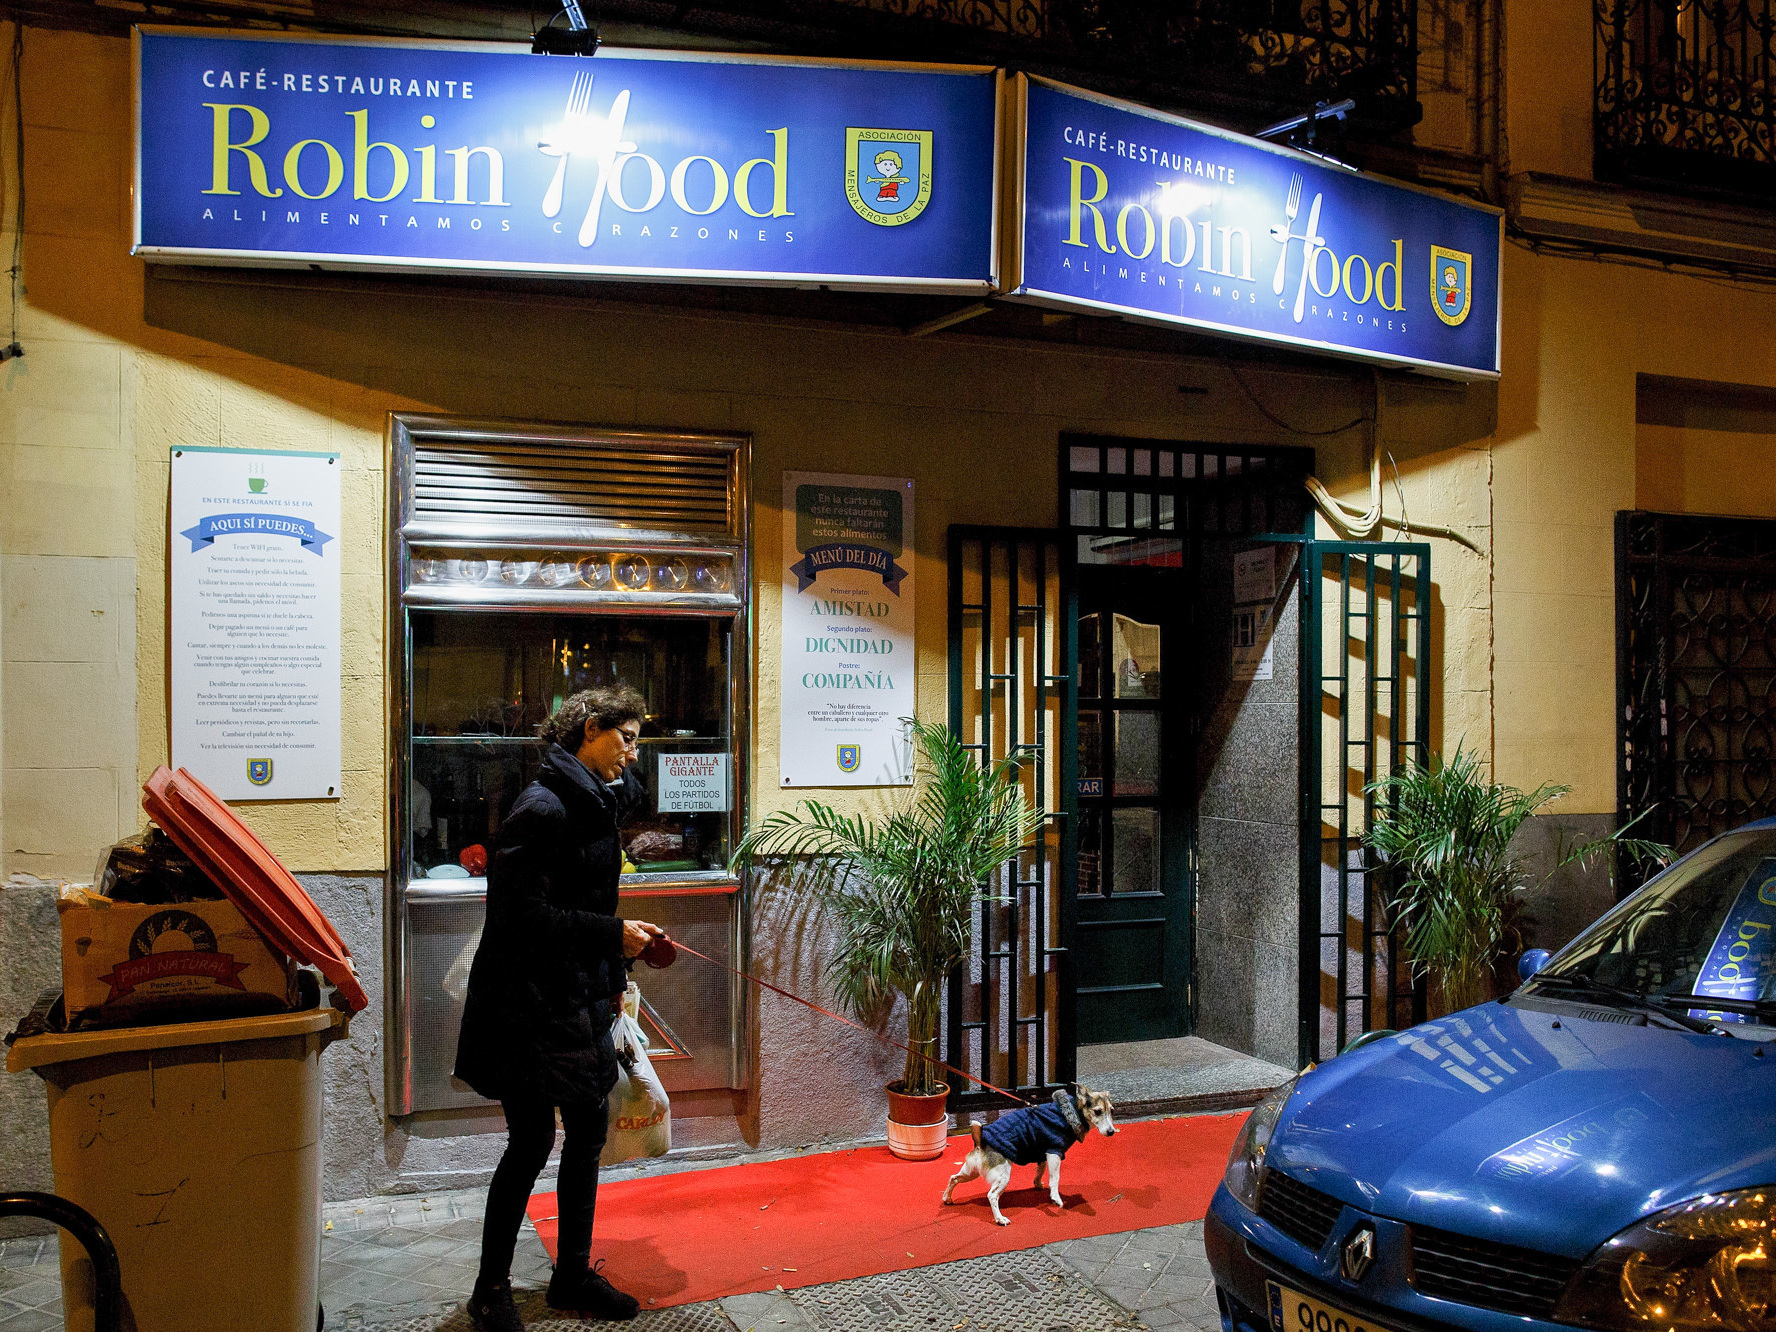 Robin Hood Restaurant has become quite the hotspot — the restaurant has poached staff from luxury hotels and celebrity chefs are lining up to work there once a week.